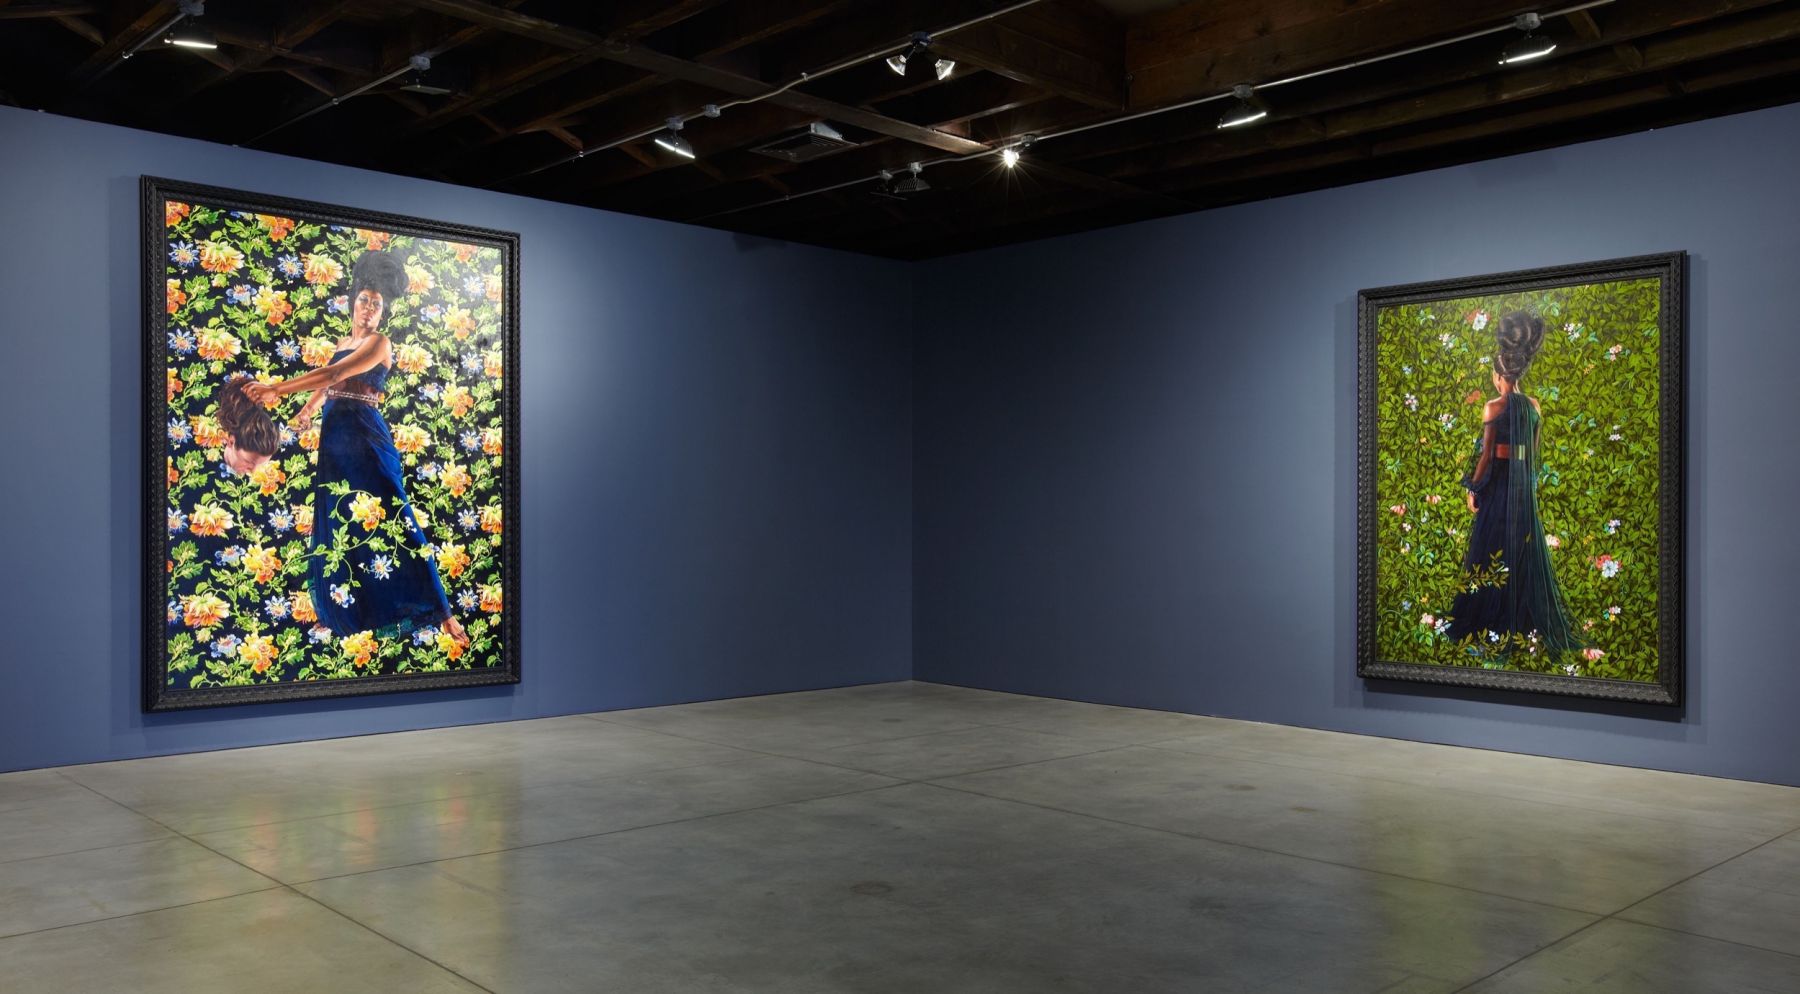 Kehinde Wiley | An Economy of Grace, Sean Kelly Gallery, New York City, USA, May 6 - June 16, 2012 | 2